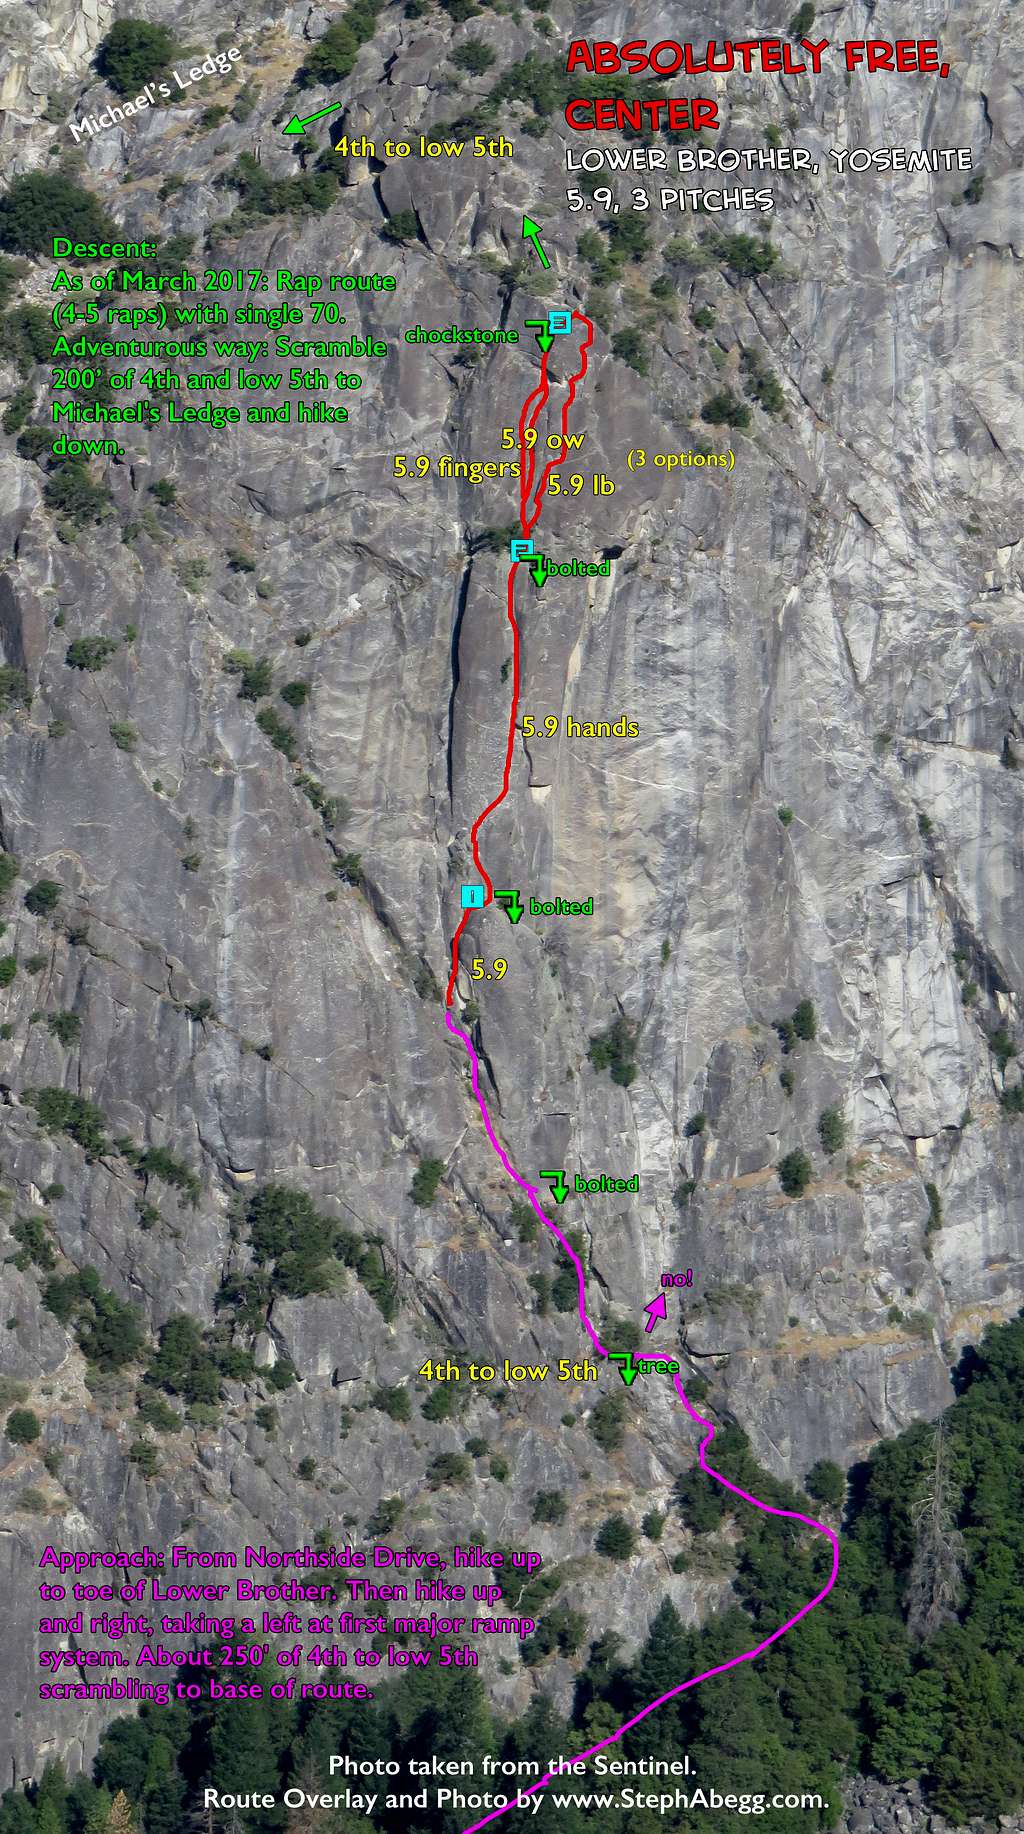 Route Overlay Absolutely Free on Lower Brother, Yosemite